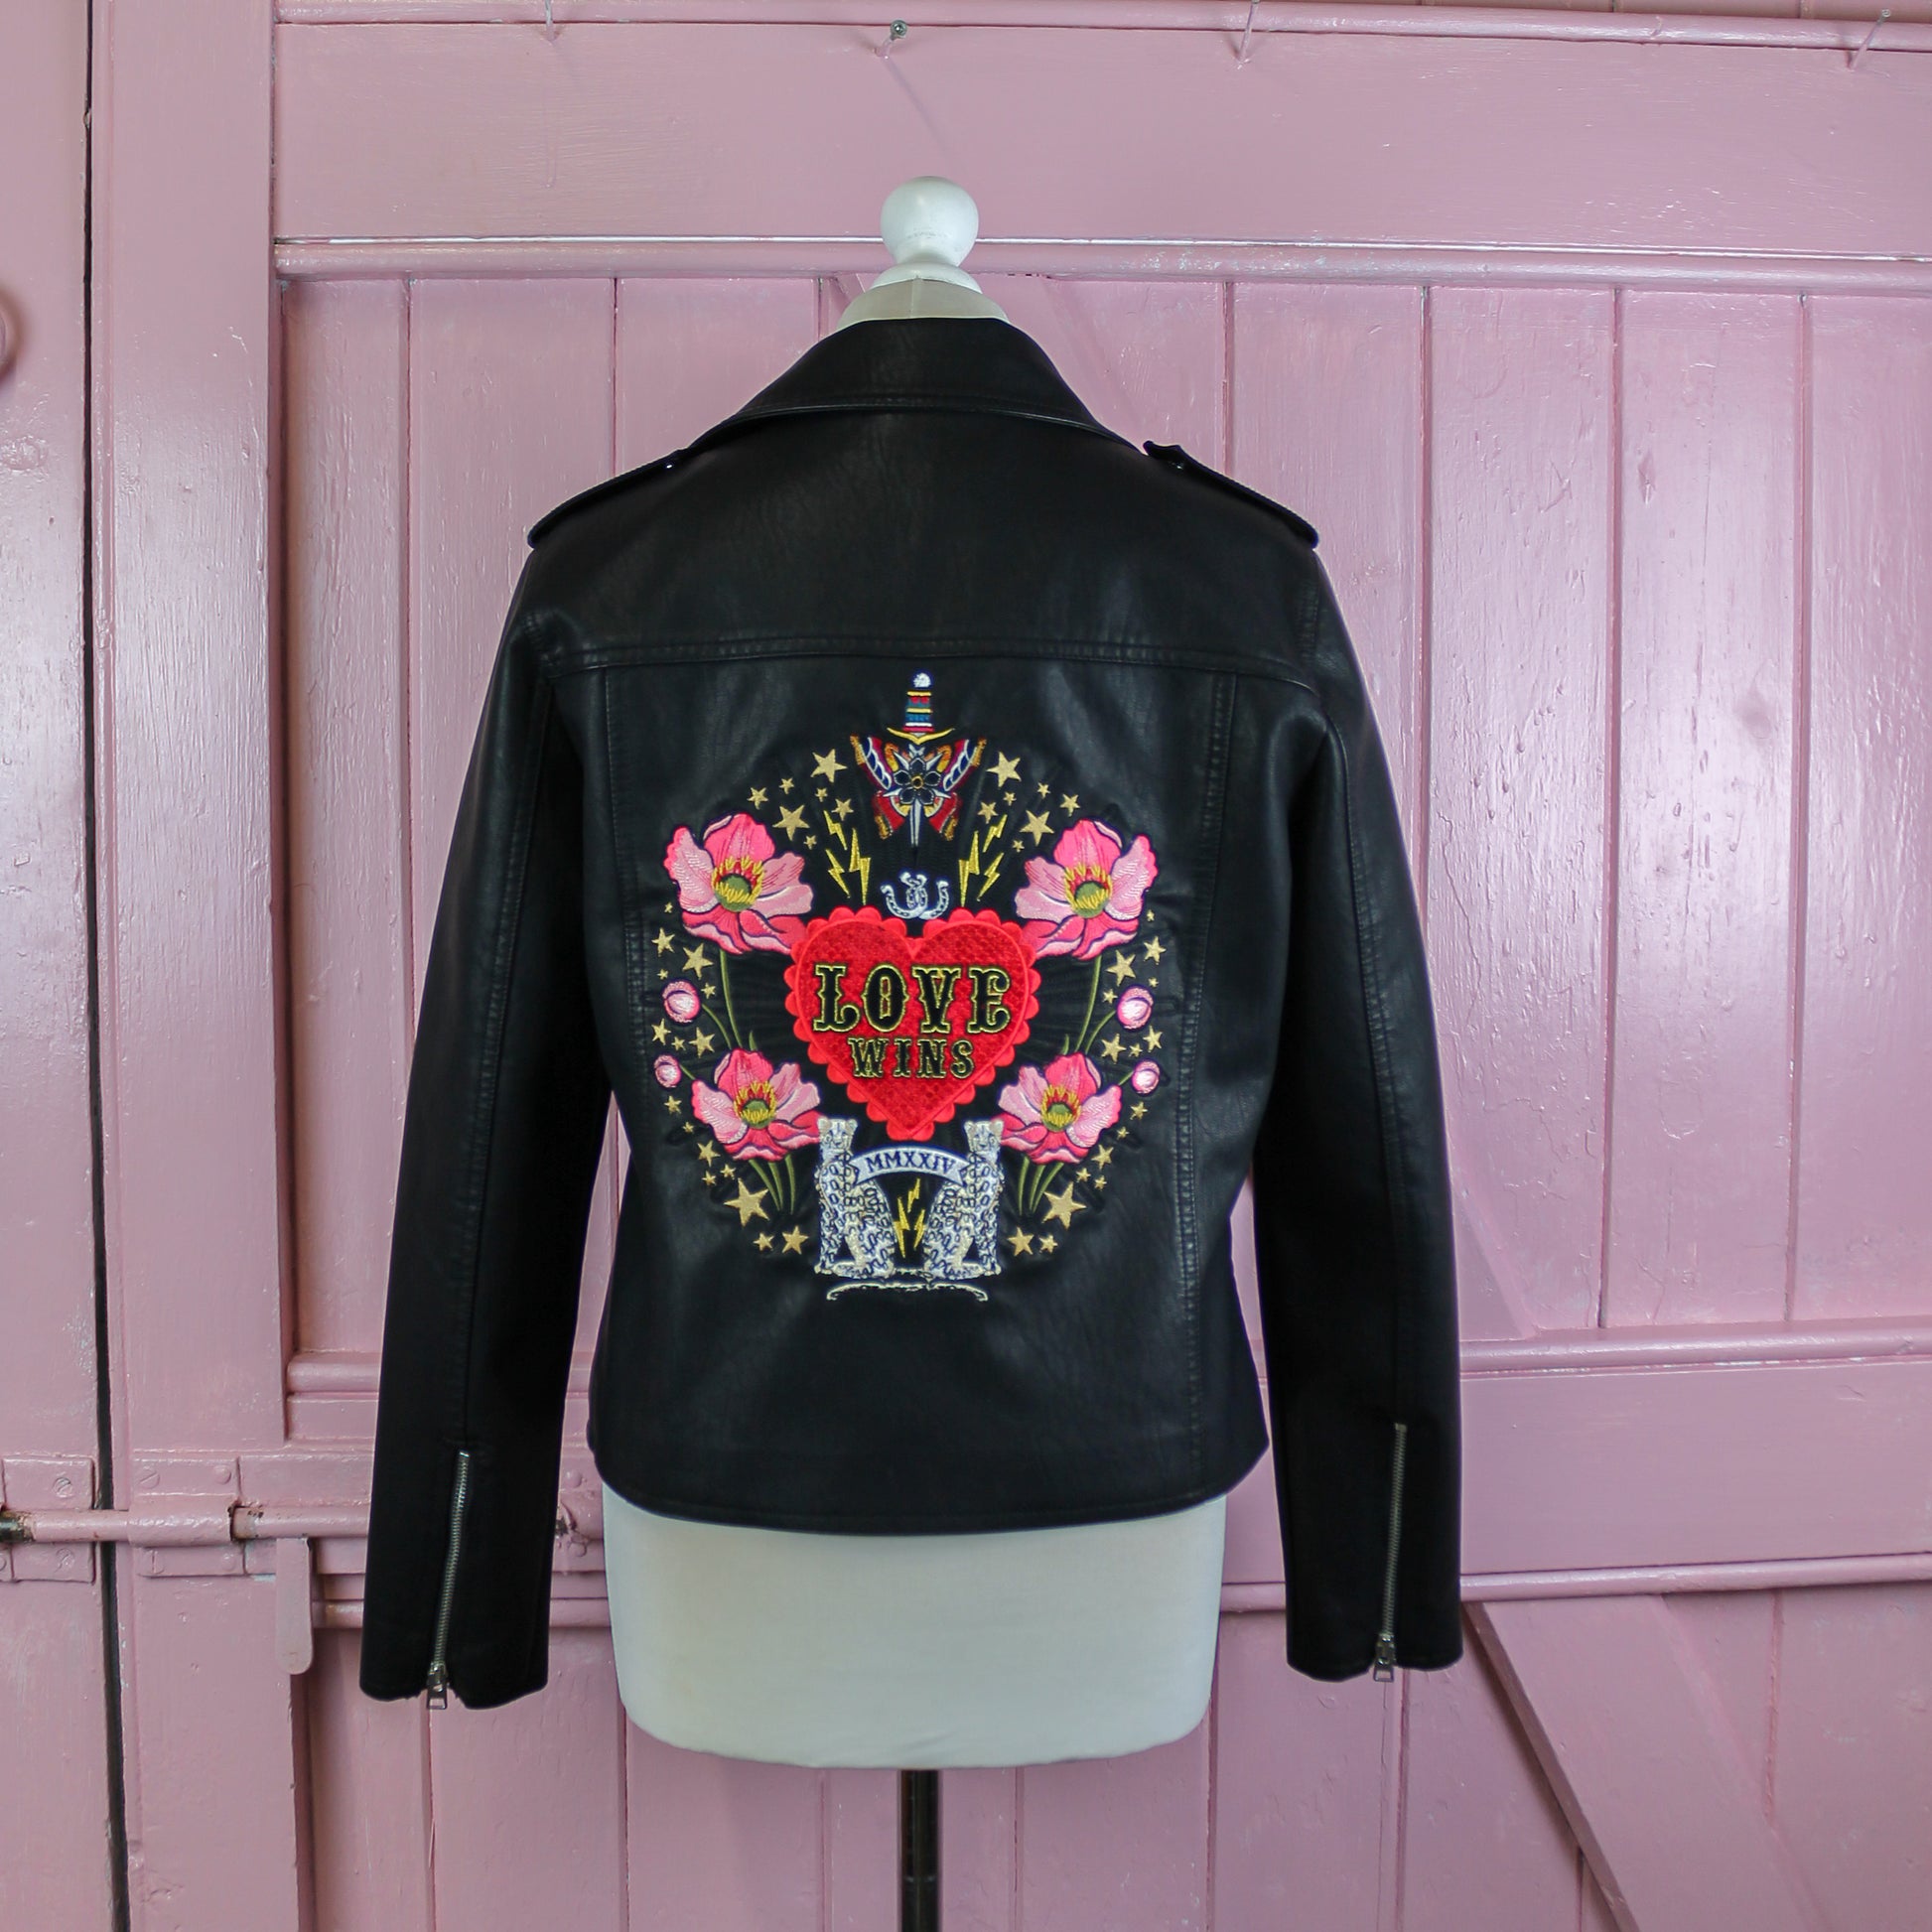 Custom black bridal jacket with personalized embroidery – Love Wins theme